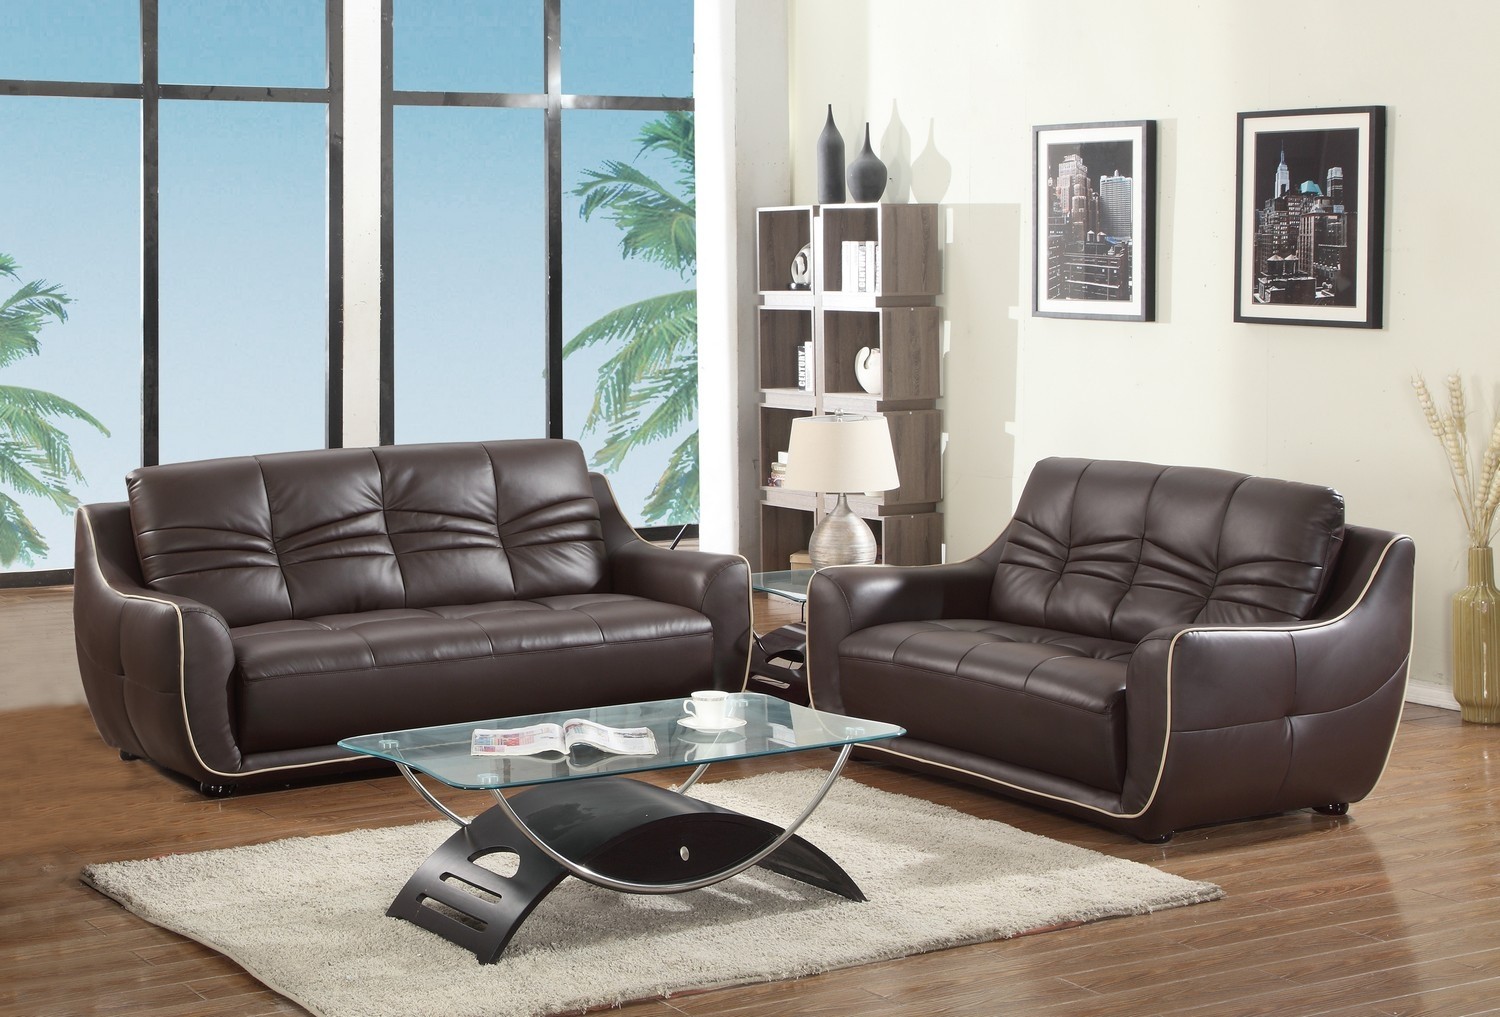 61'' X 39'' X 36'' Modern Brown Leather Sofa And Loveseat